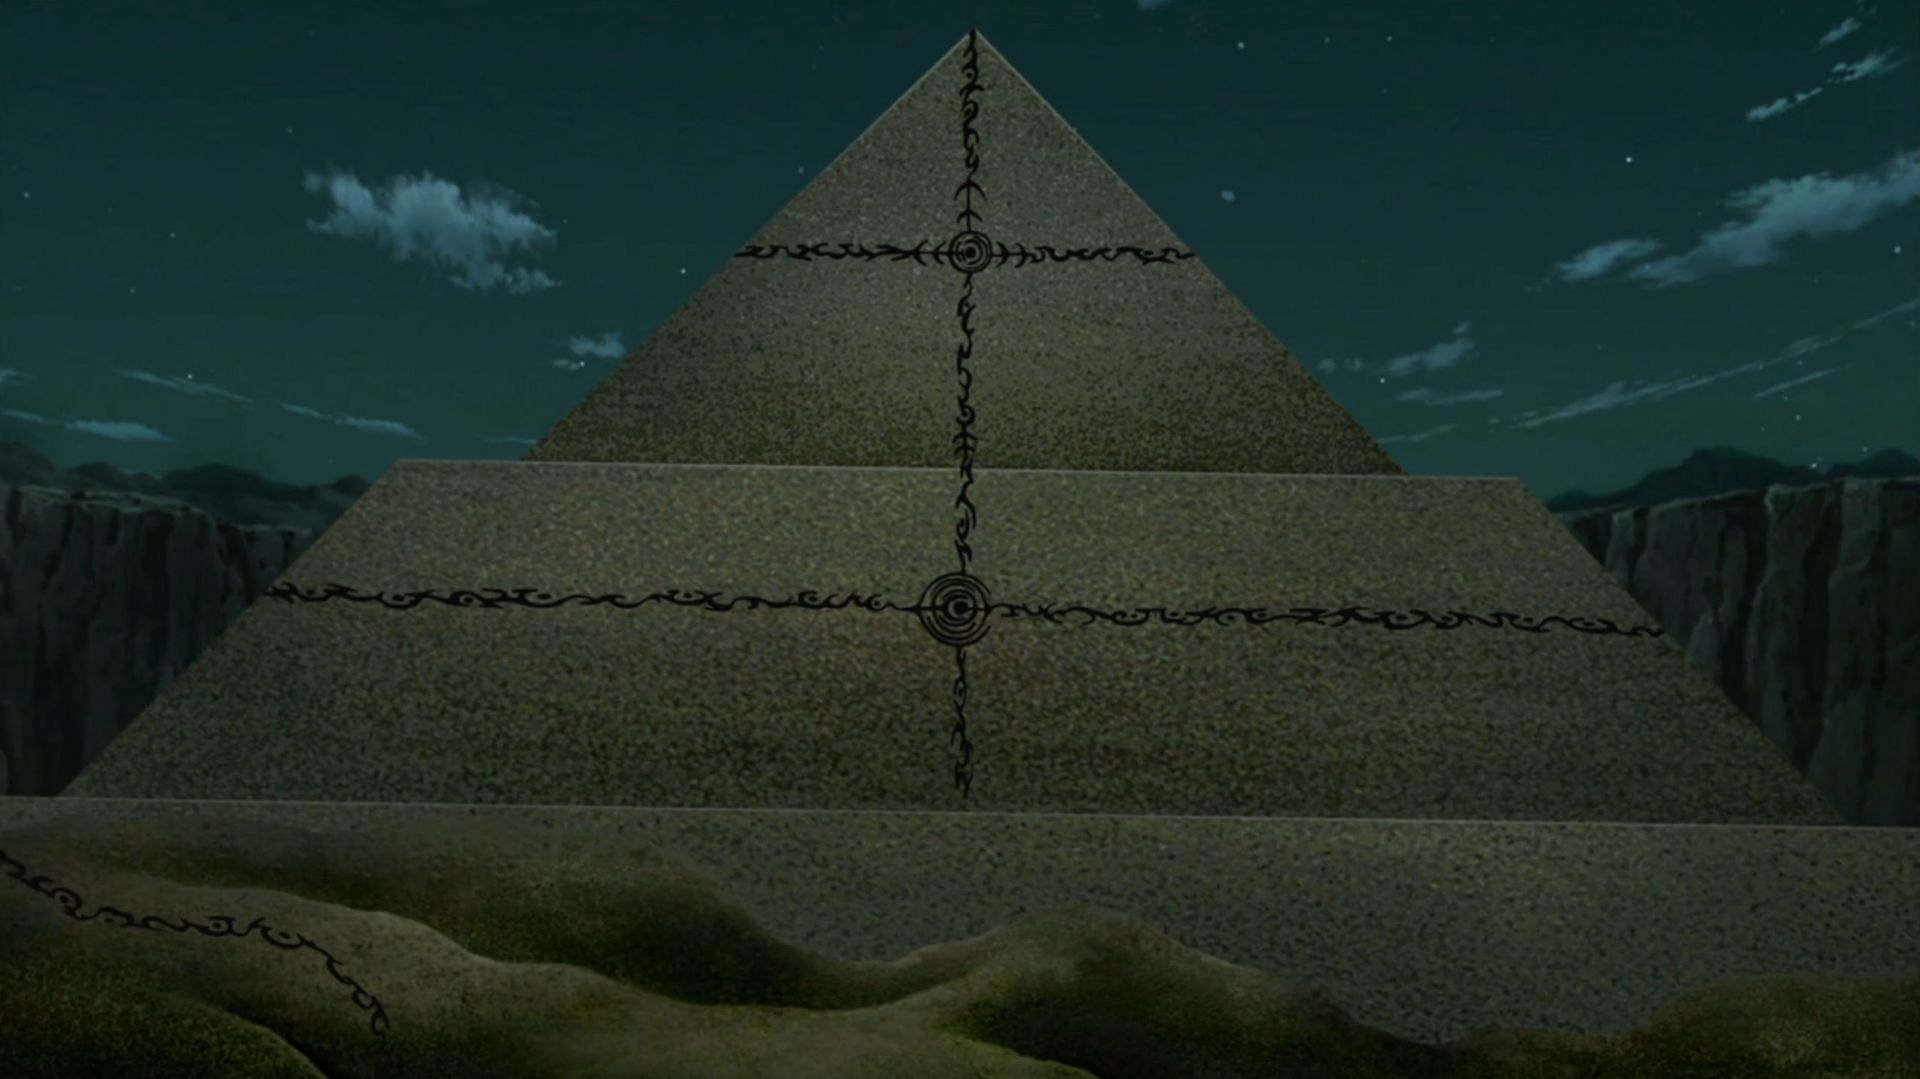 The Desert Layered Imperial Funeral Seal as it appears in the series (Image via Studio Pierrot)